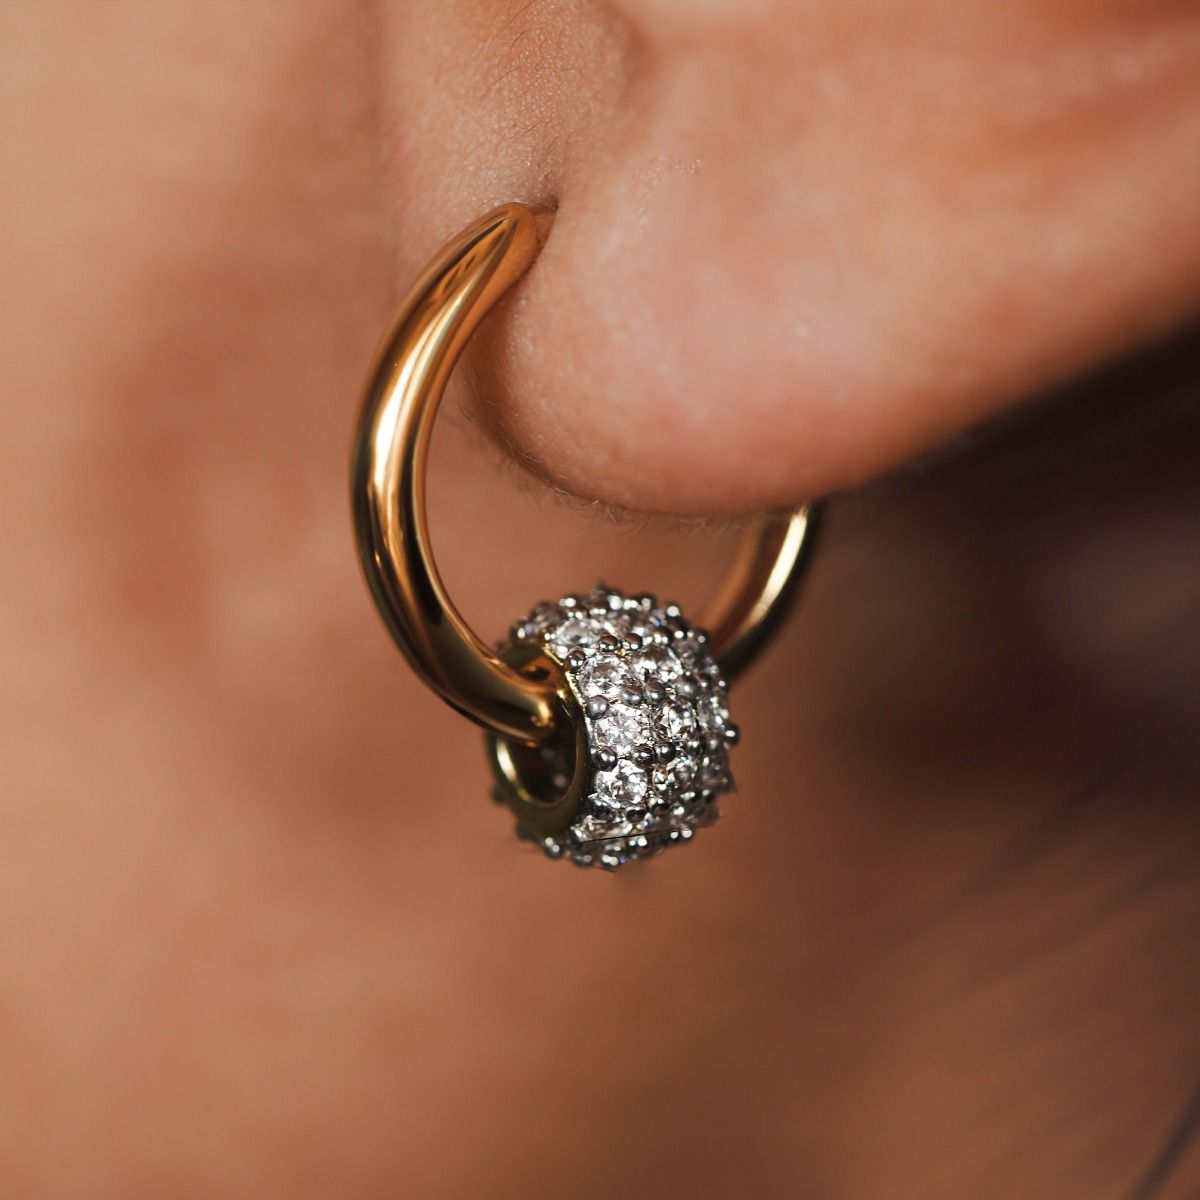 Elevate your style with our Two-Tone Pave Barrel Hoop Earrings. These exquisite earrings combine a polished gold hoop with a cubic zirconia encrusted barrel. Perfect for adding a touch of sophistication and eye-catching detail to any outfit. 